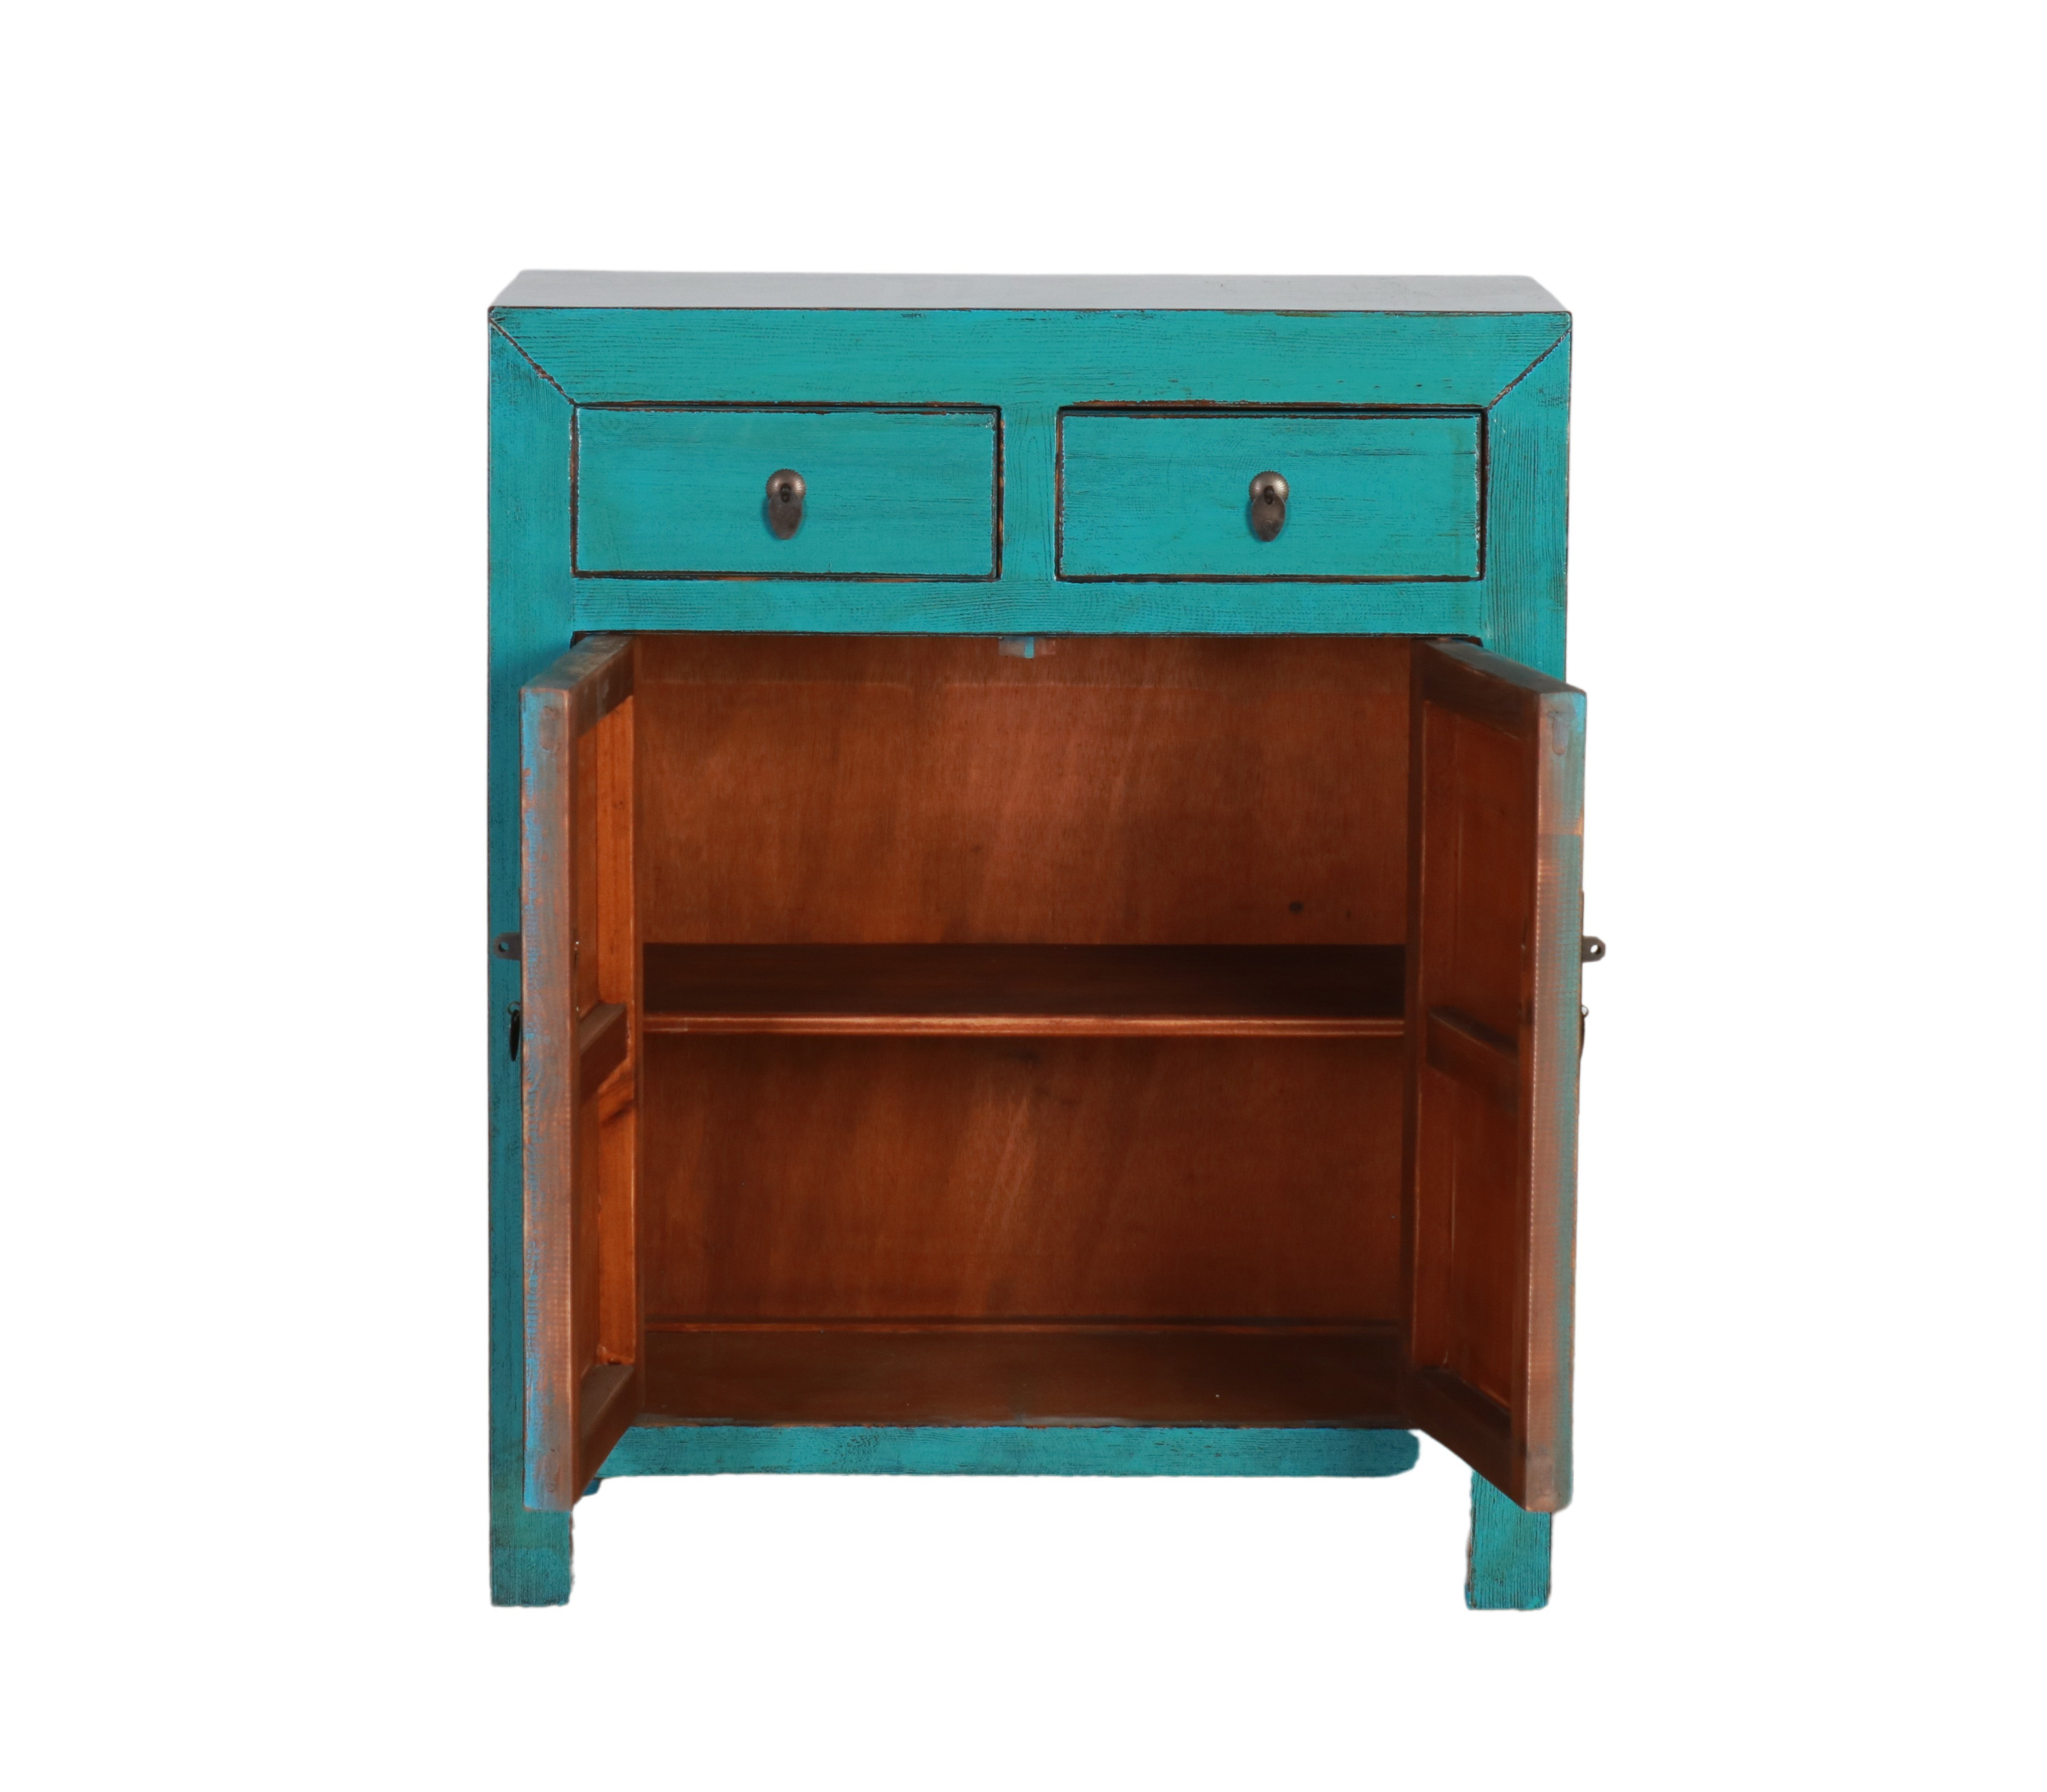 Turquoise lacquered Chinese cabinet 2 door 2 drawer